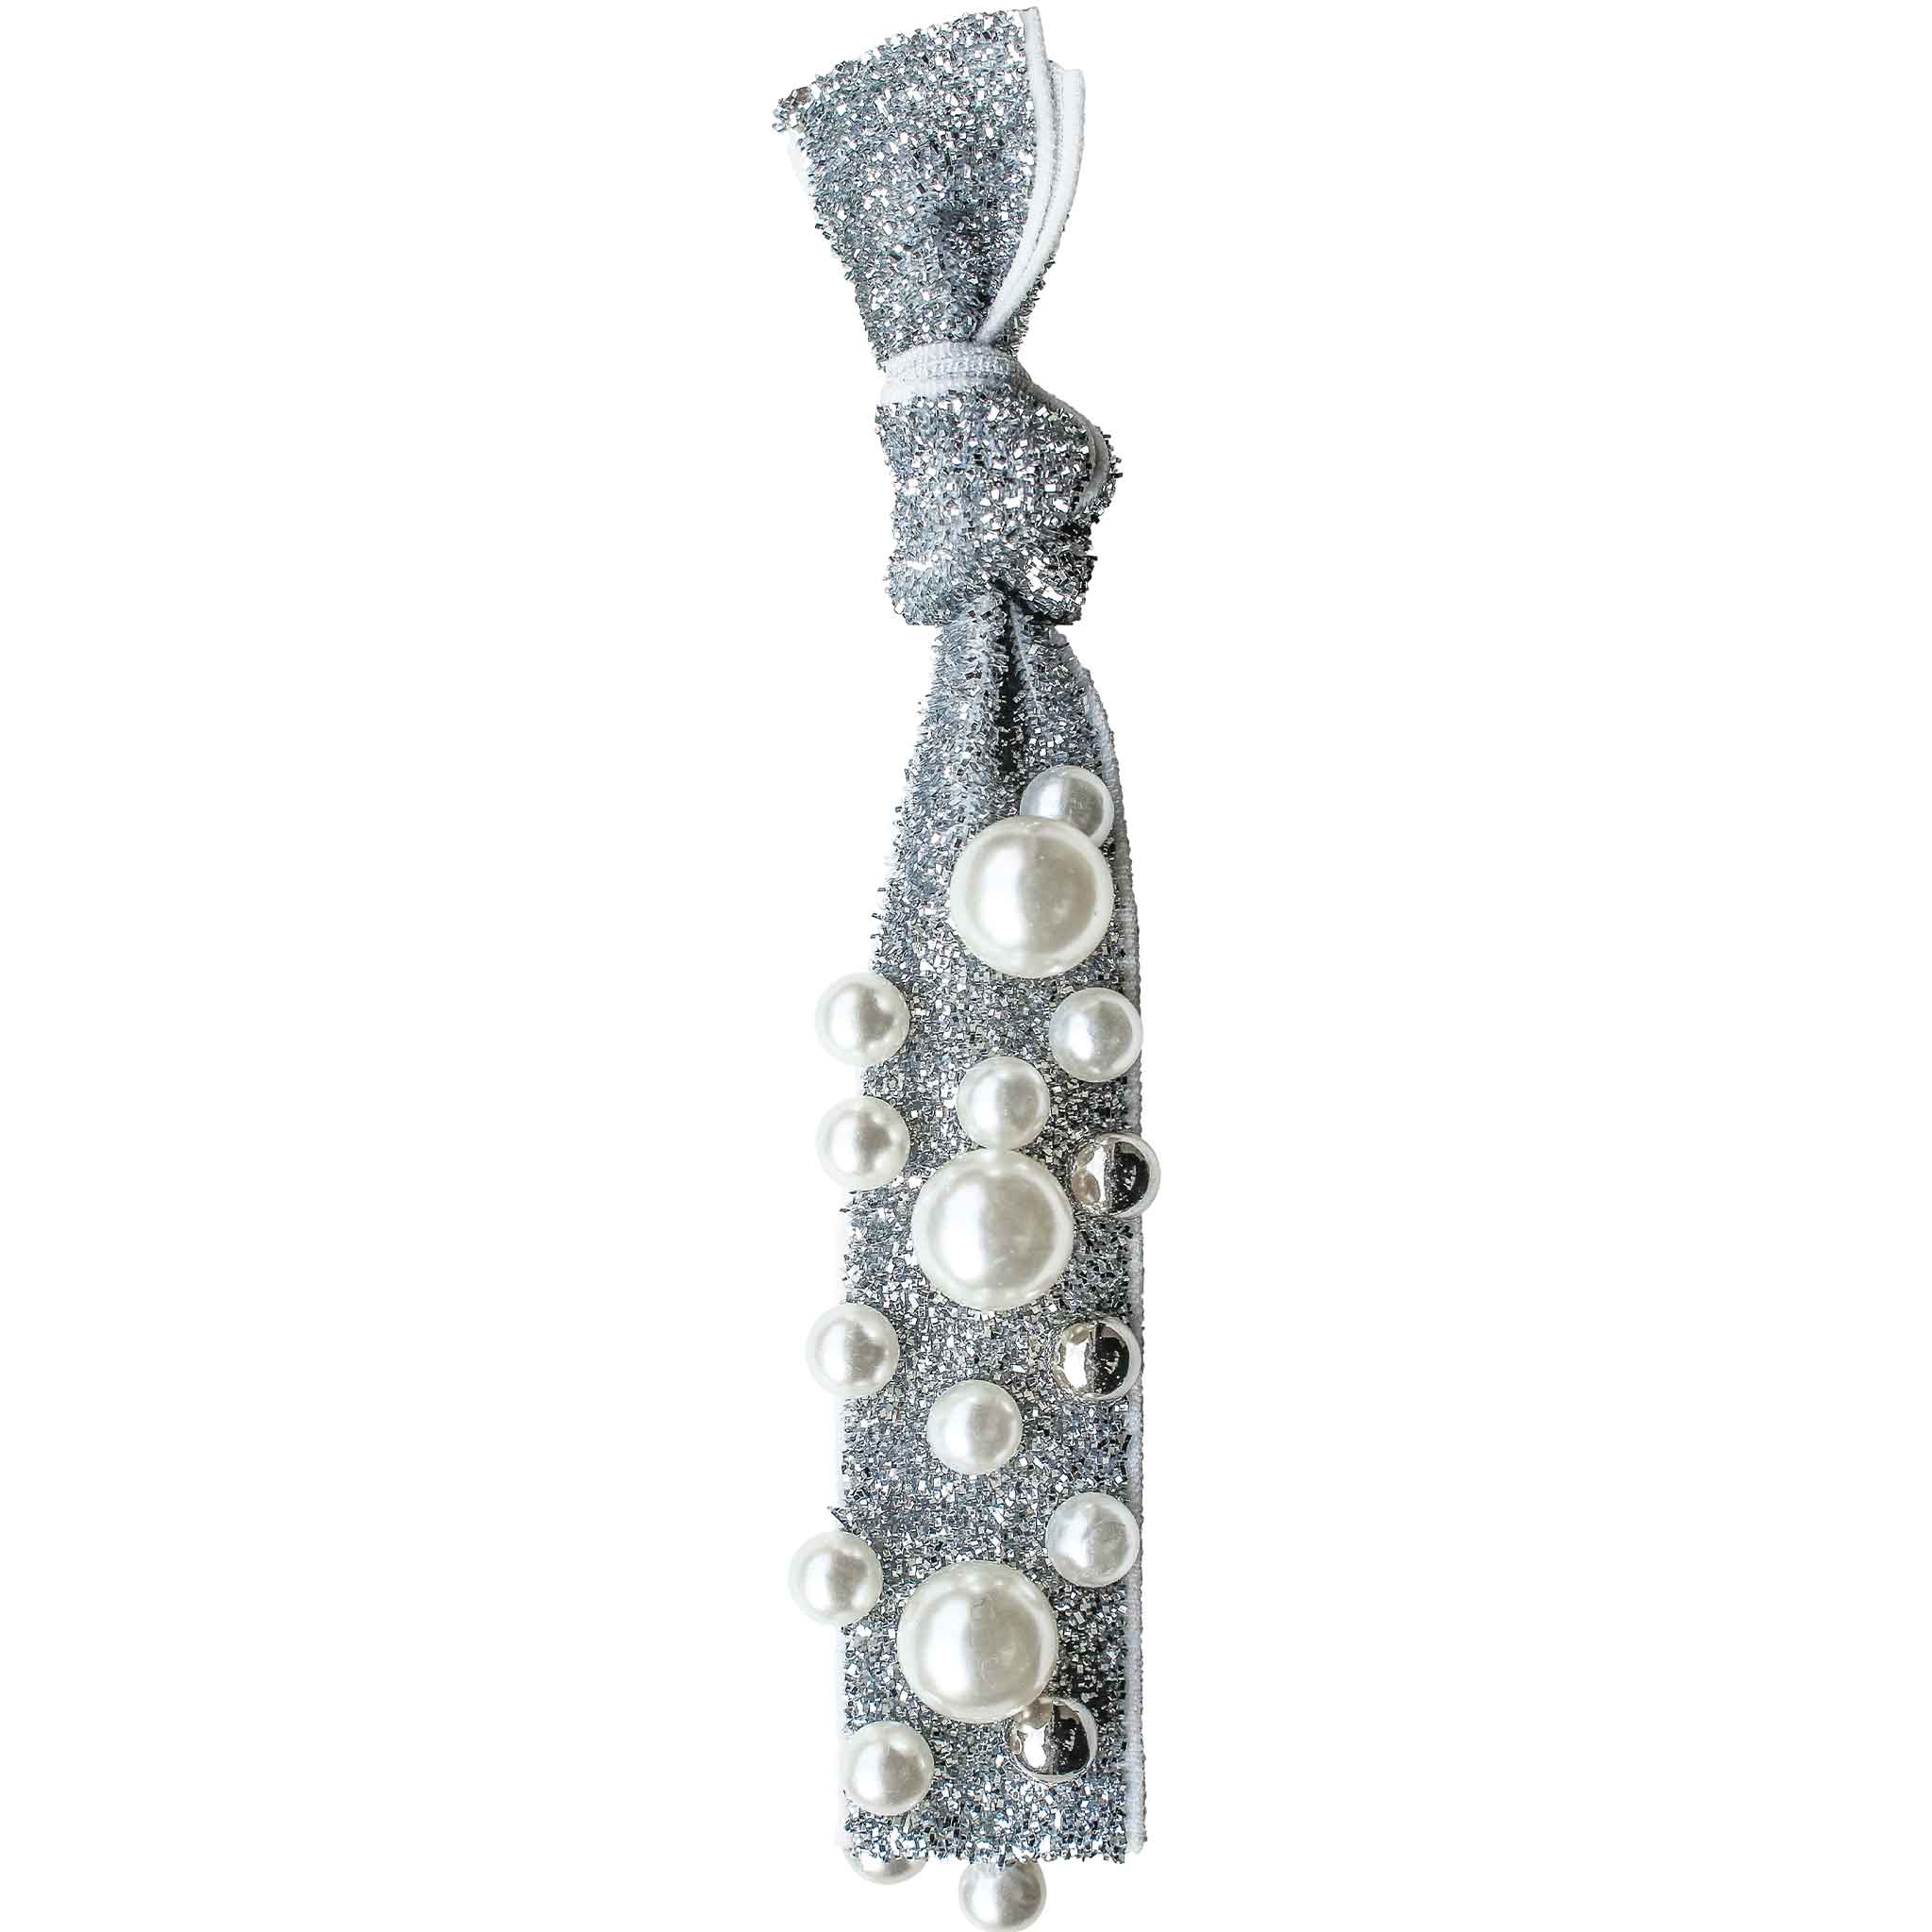 Gemelli Jewelry Hair Tie with Vegan Pearl and Silver Ball Studs in Silver Tinsel